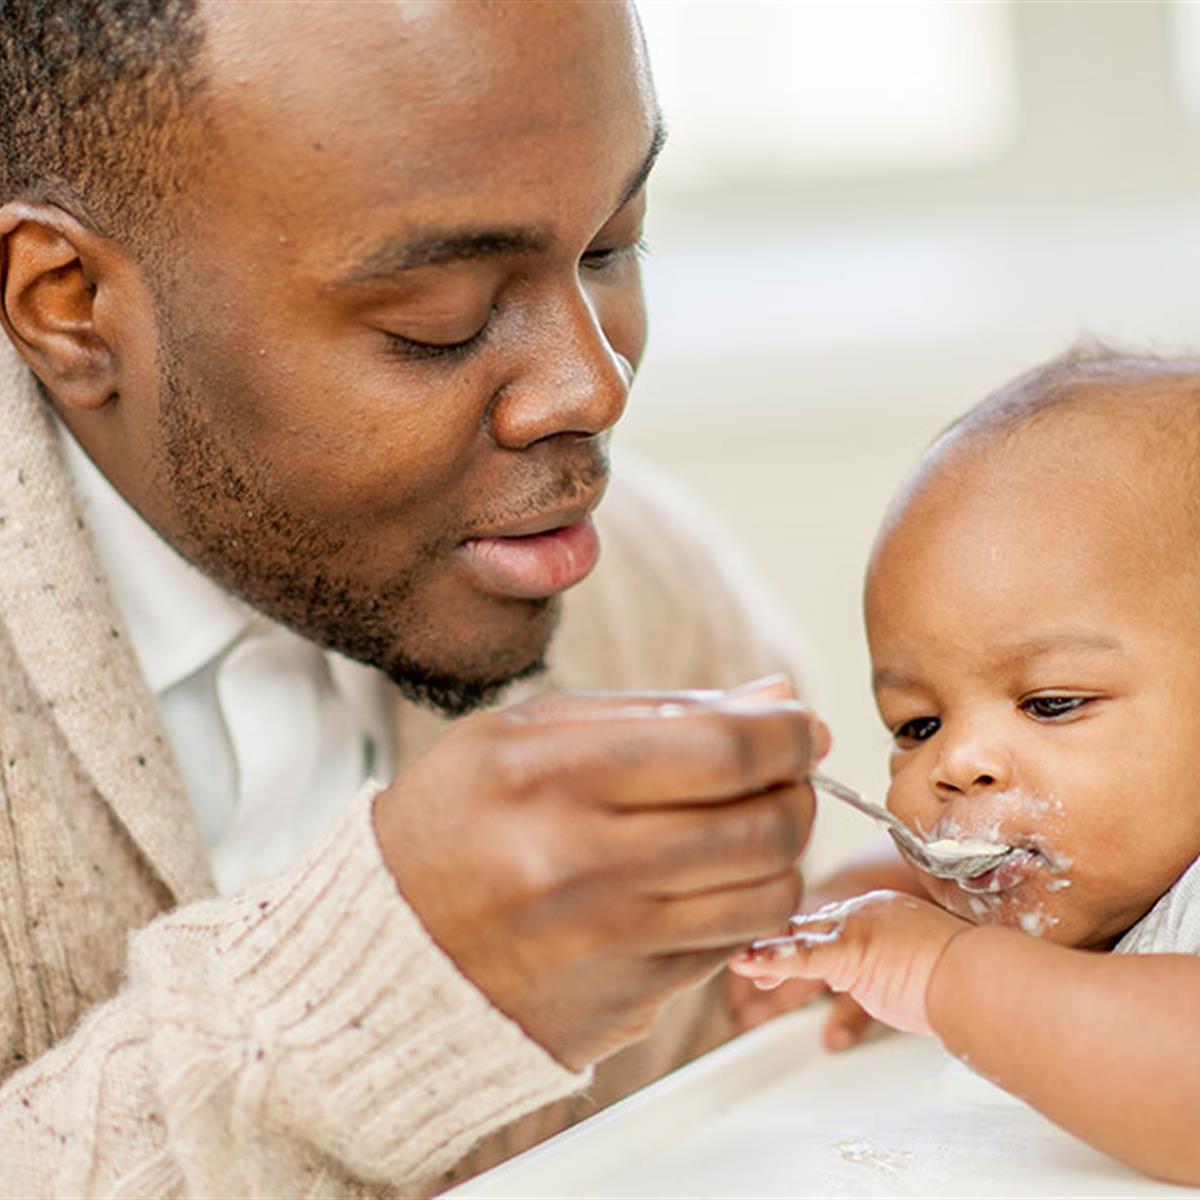 Top Foods for 8 Month Old Baby - MJ and Hungryman